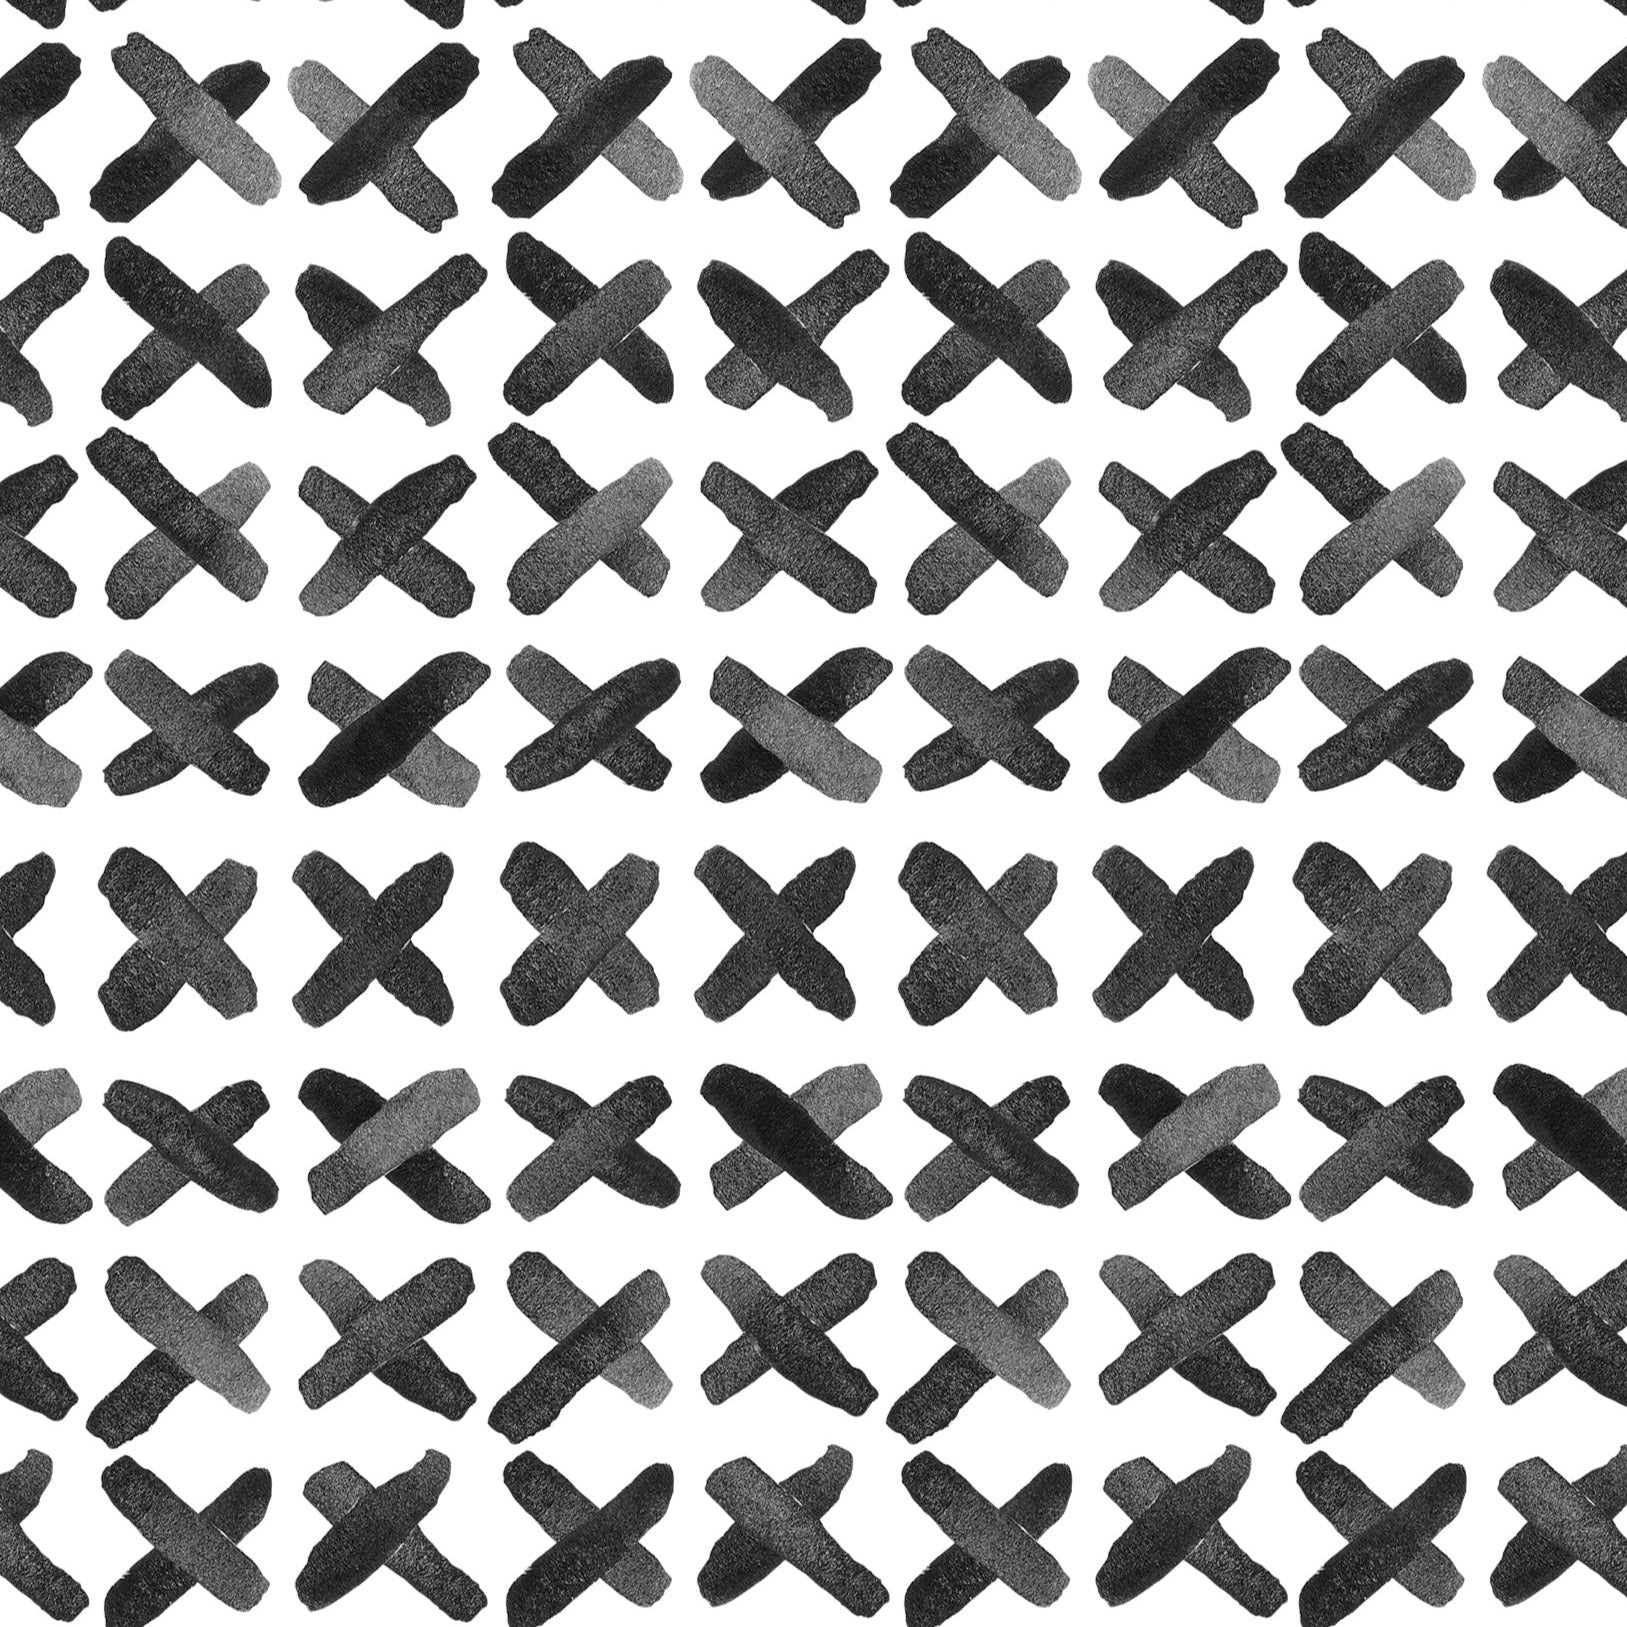 Close-up view of X Infinity Boho Wallpaper displaying a striking black and white geometric cross pattern for a contemporary bohemian style.